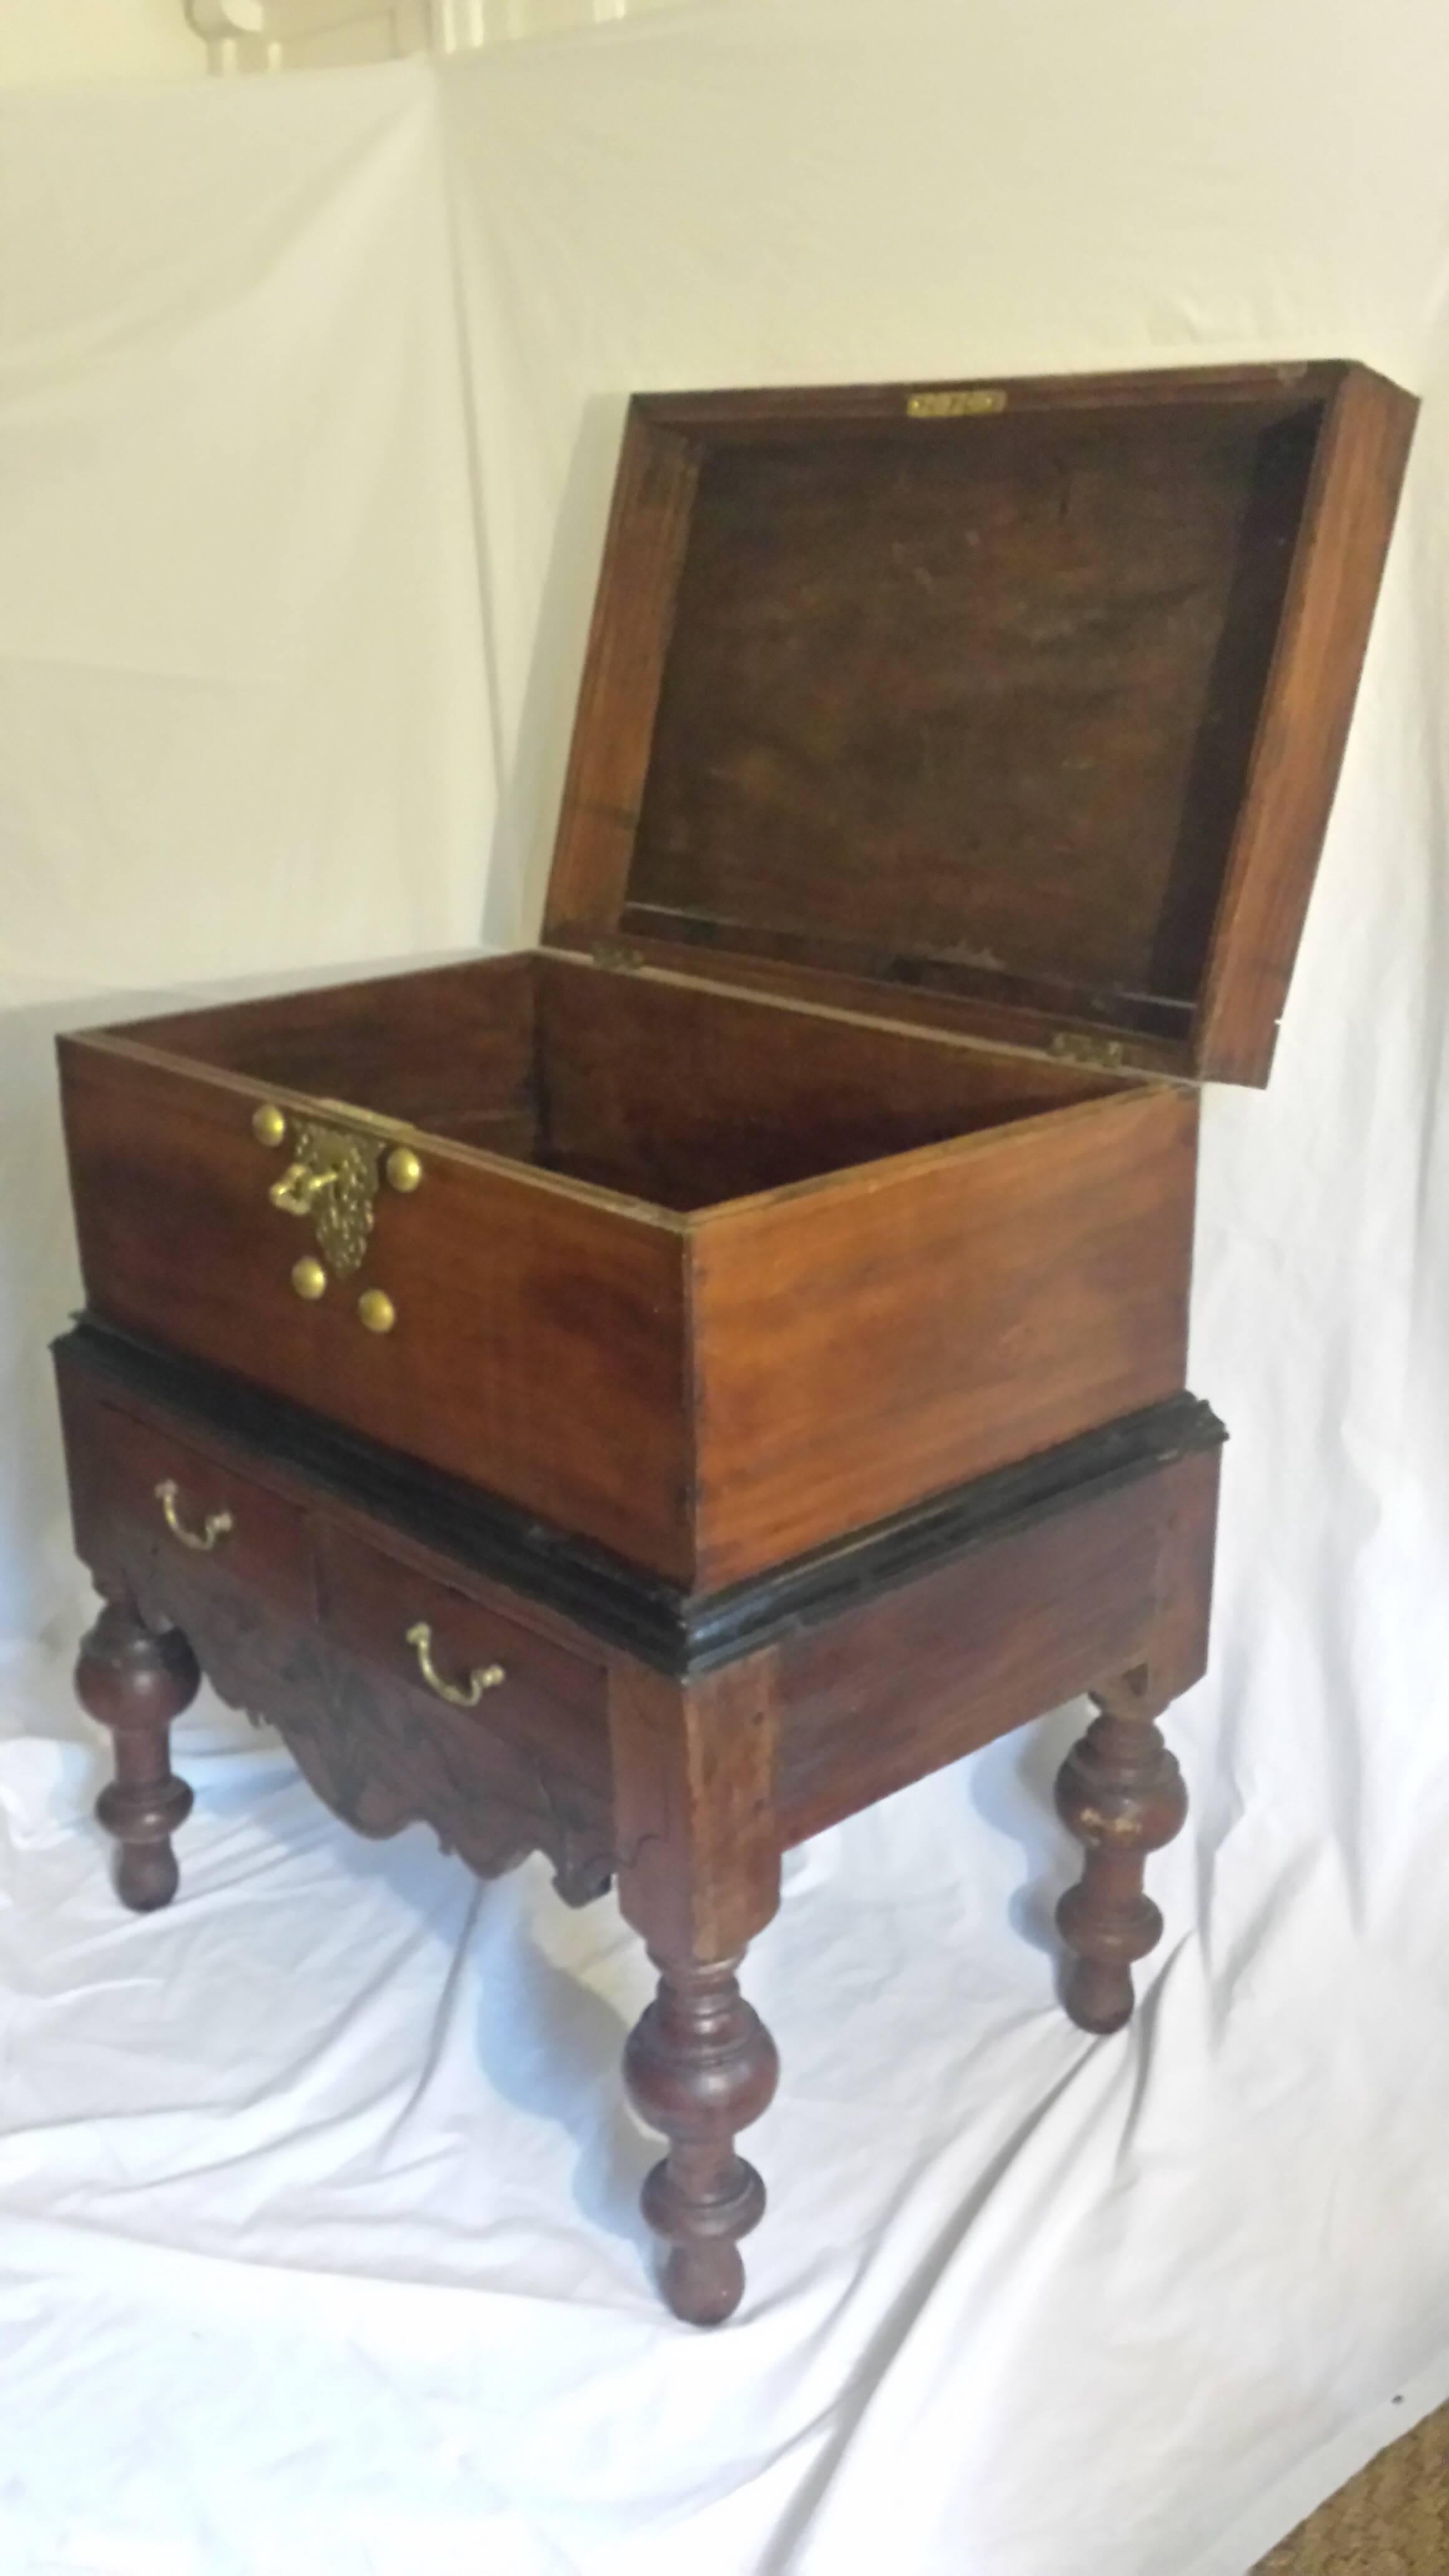 Dutch Colonial, Ceylonese, chest on stand, Sri Lanka, circa 1890.
Chest with original brass hardware. The top chest can be removed and used separately from the stand. The stand with beautiful ebony banding and inlay detailing just below two drawers